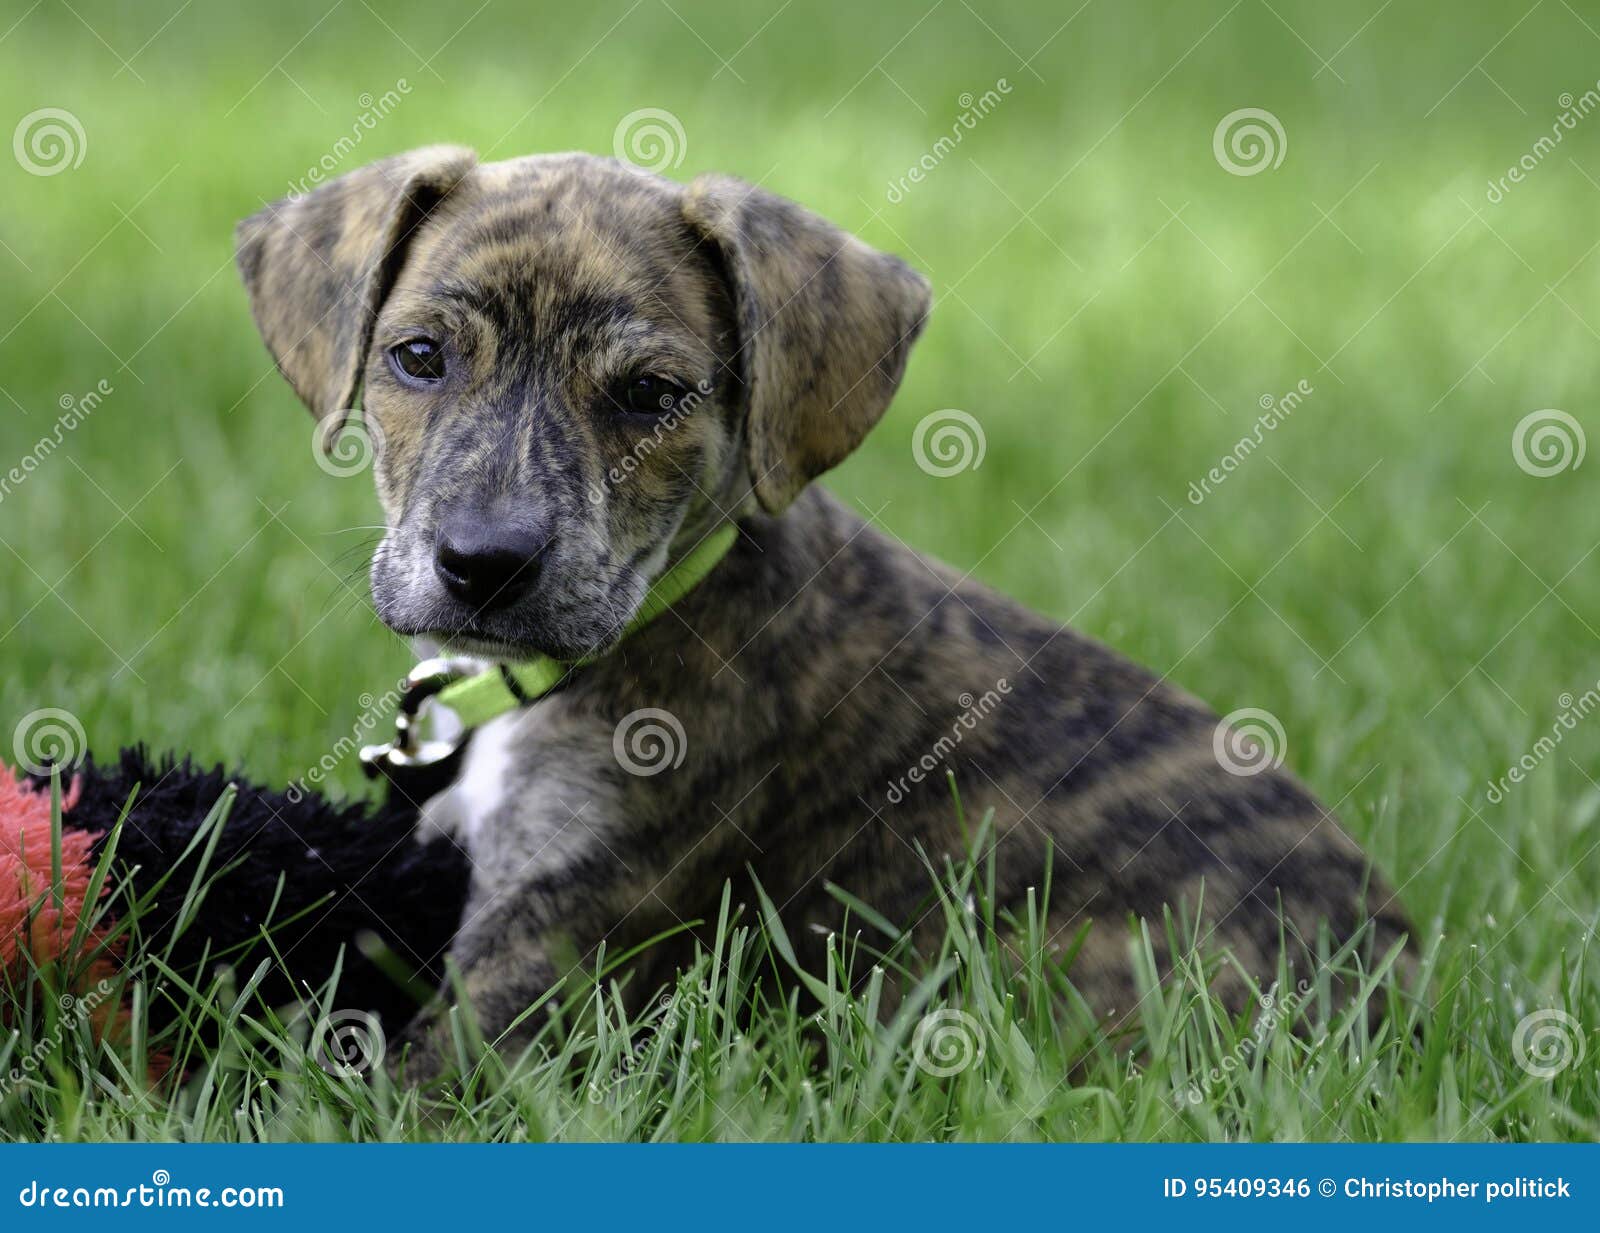 Curiously Cute Mountain Cur Rescue Puppy Stock Photo Image Of Yard Adoption 95409346